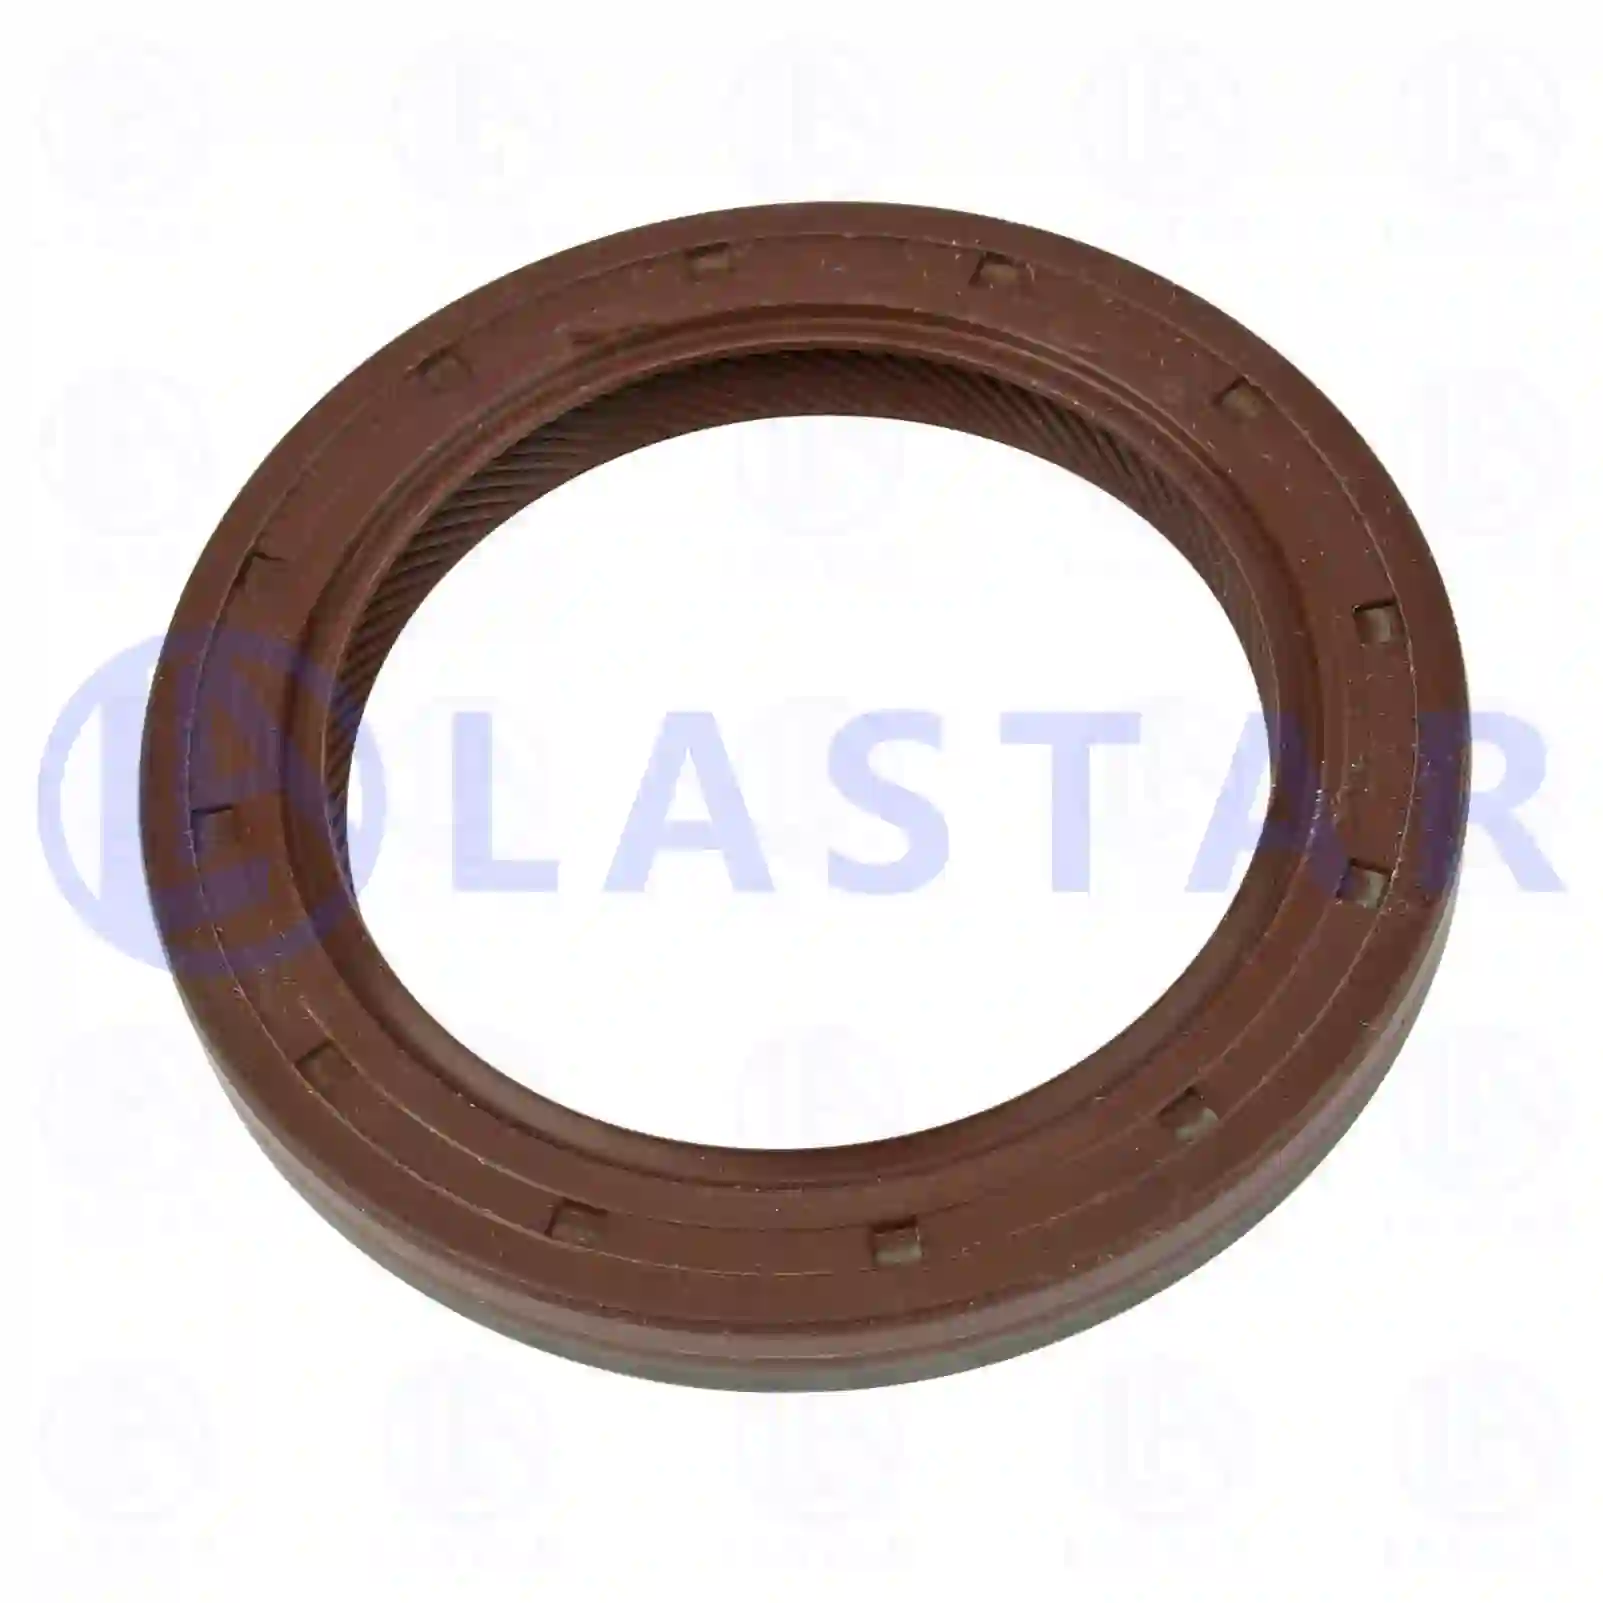 Oil seal, 77731954, 0089971947, 0109972946, 0109975946, 0109979447, 0159970347, 0159970447, 0159970547 ||  77731954 Lastar Spare Part | Truck Spare Parts, Auotomotive Spare Parts Oil seal, 77731954, 0089971947, 0109972946, 0109975946, 0109979447, 0159970347, 0159970447, 0159970547 ||  77731954 Lastar Spare Part | Truck Spare Parts, Auotomotive Spare Parts